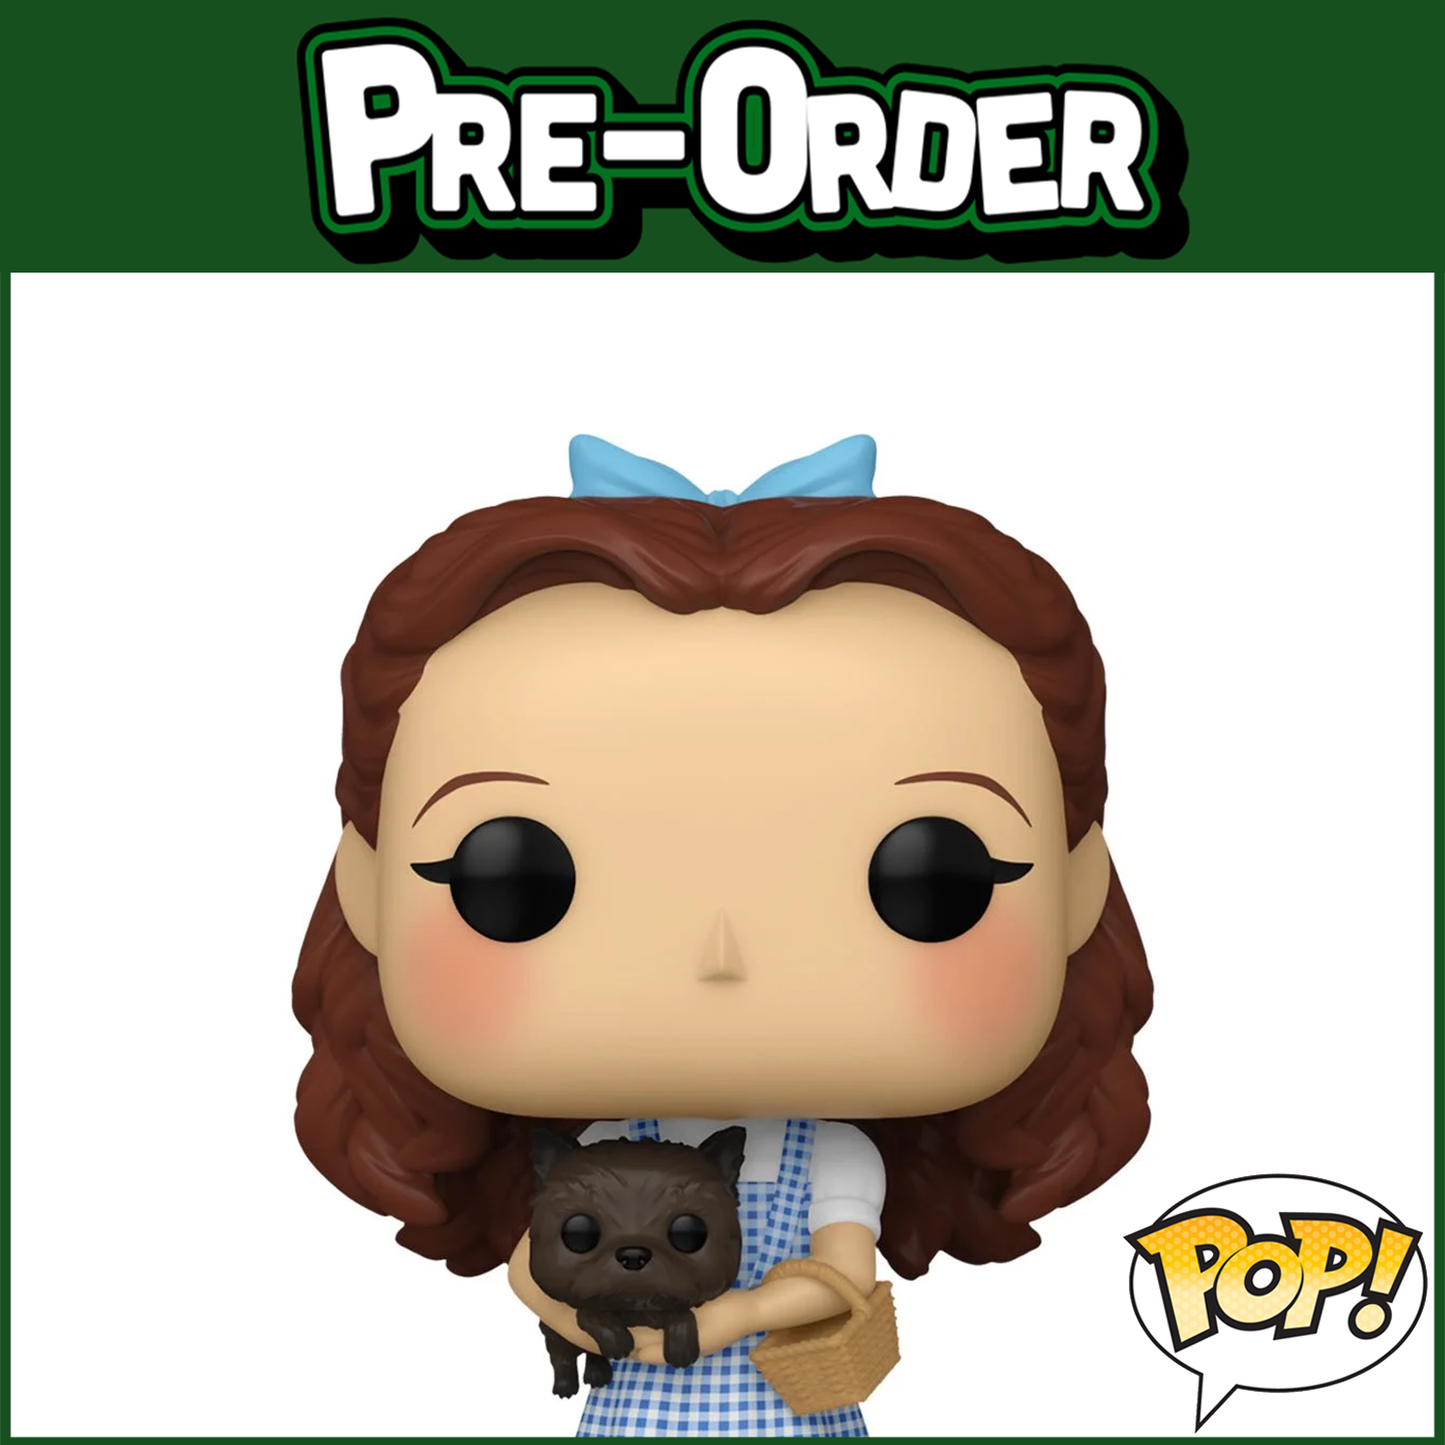 (PRE-ORDER) Funko POP! Movies: The Wizard of Oz 85th - Dorothy & Toto #1502